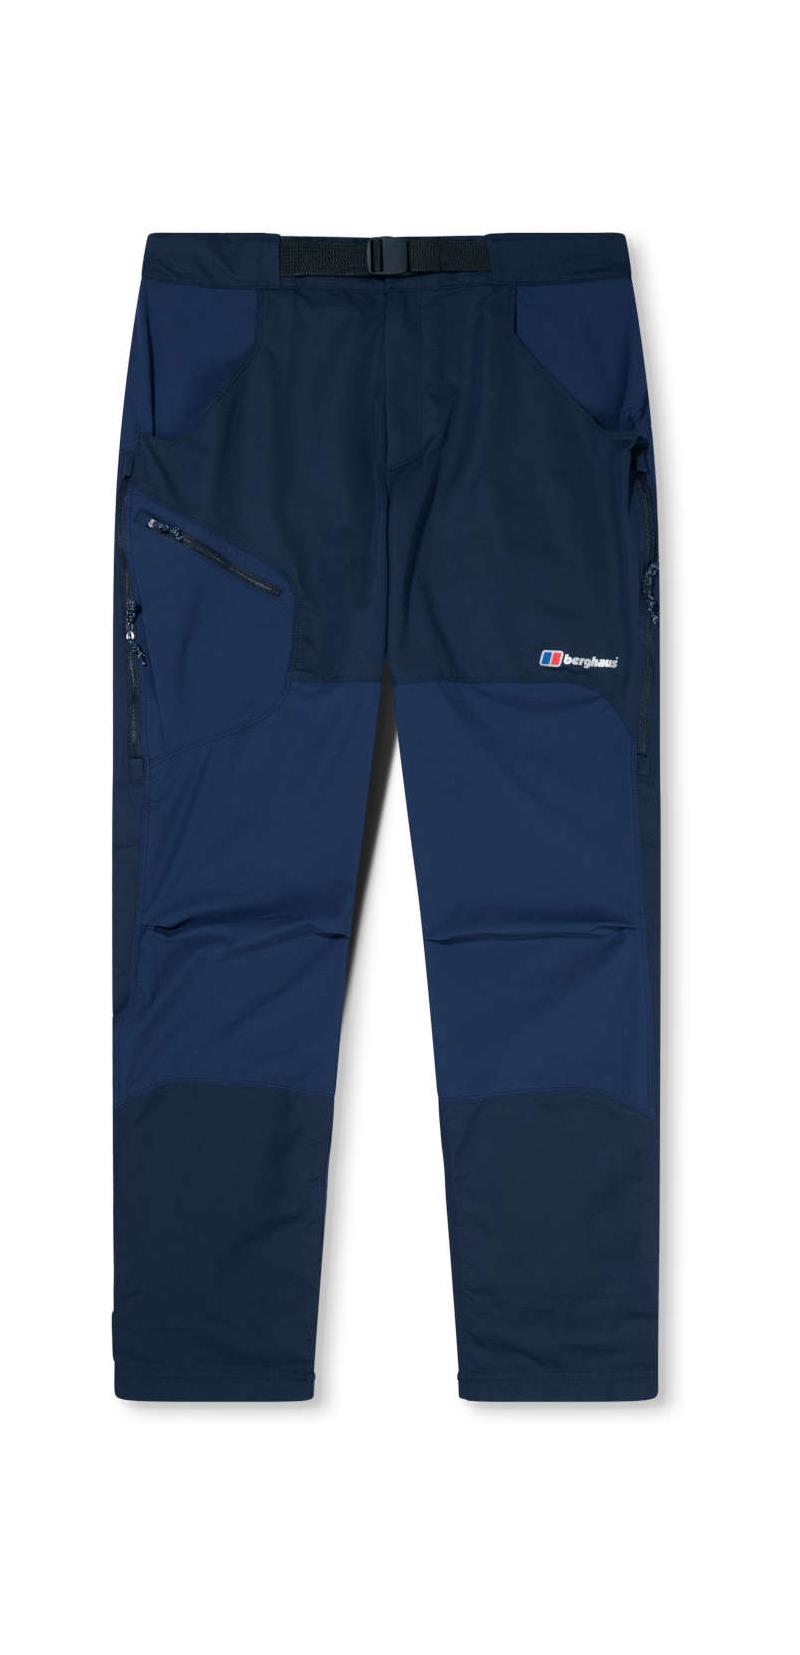 Berghaus Extrem Fast Hike Mens Trousers - Long-5